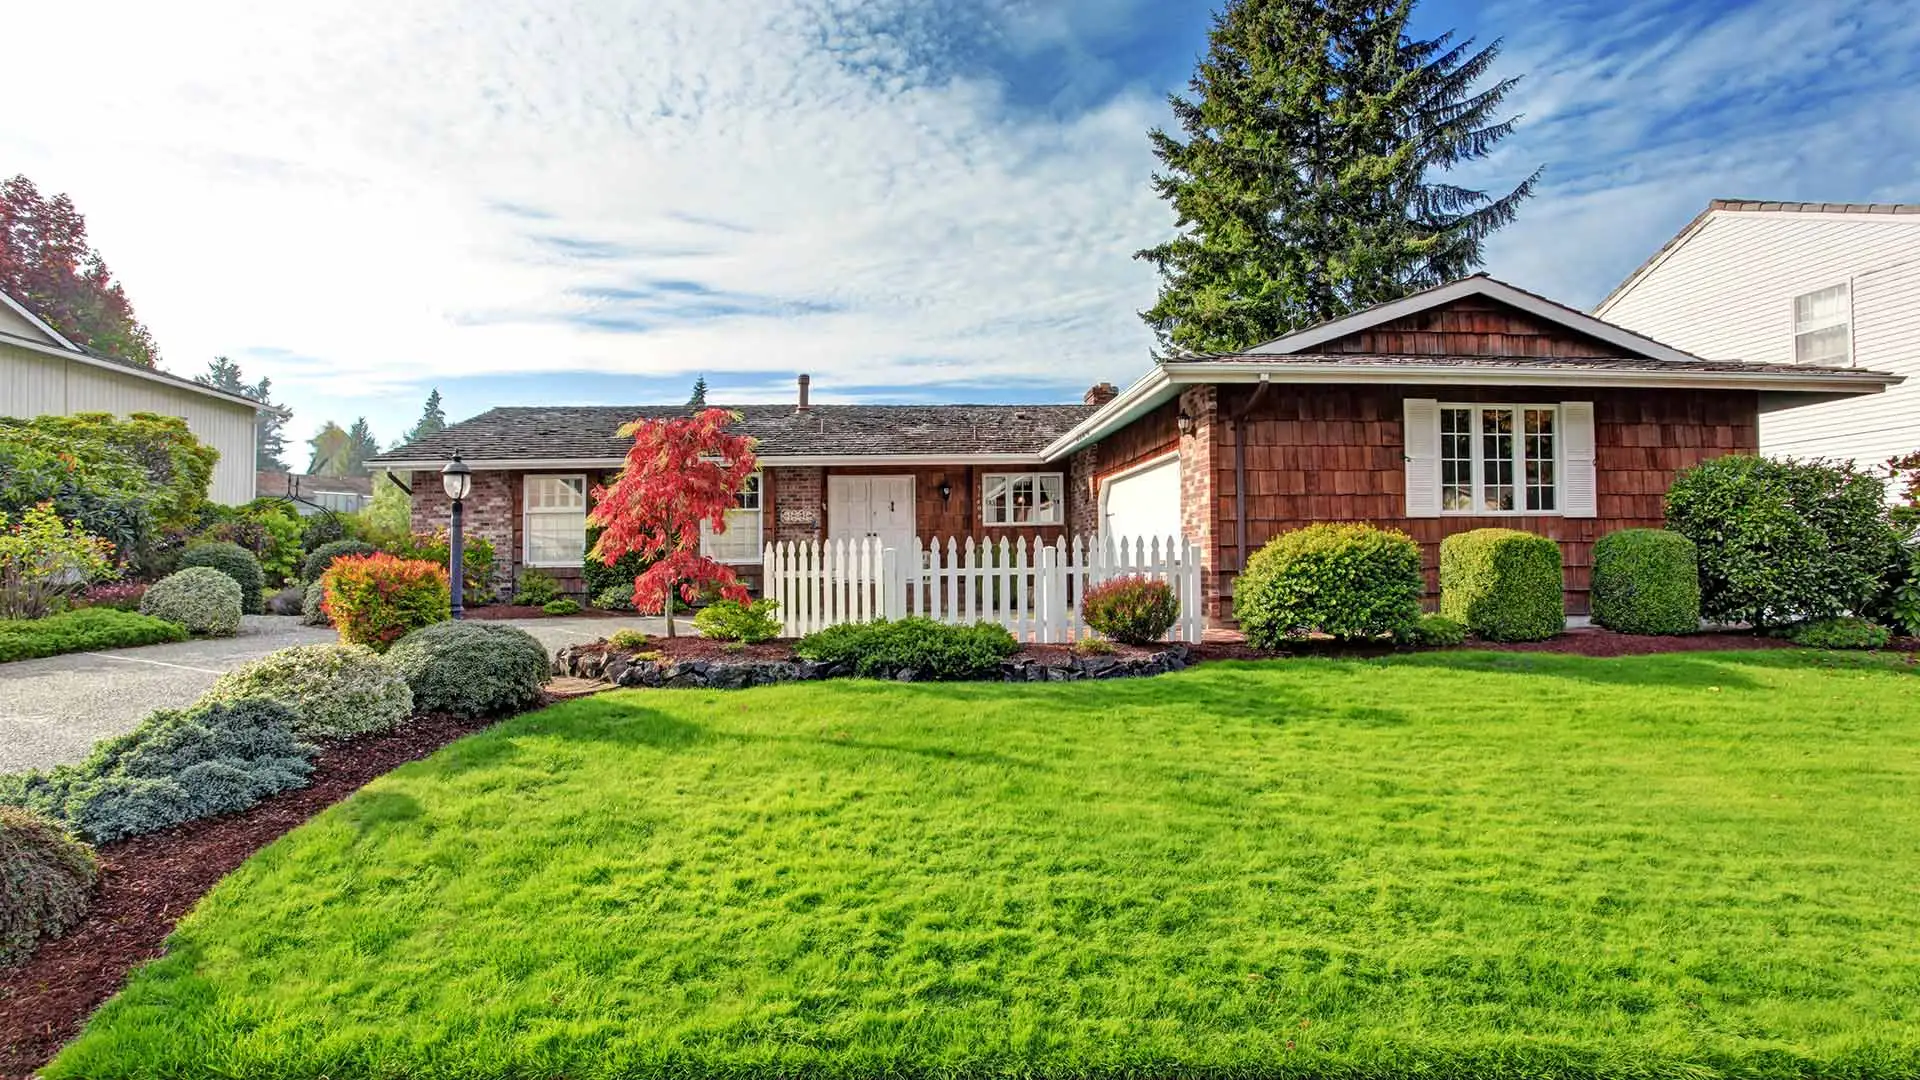 Gorgeous lawn with flawless shrubs and brown wood house in Plainfield, IN.